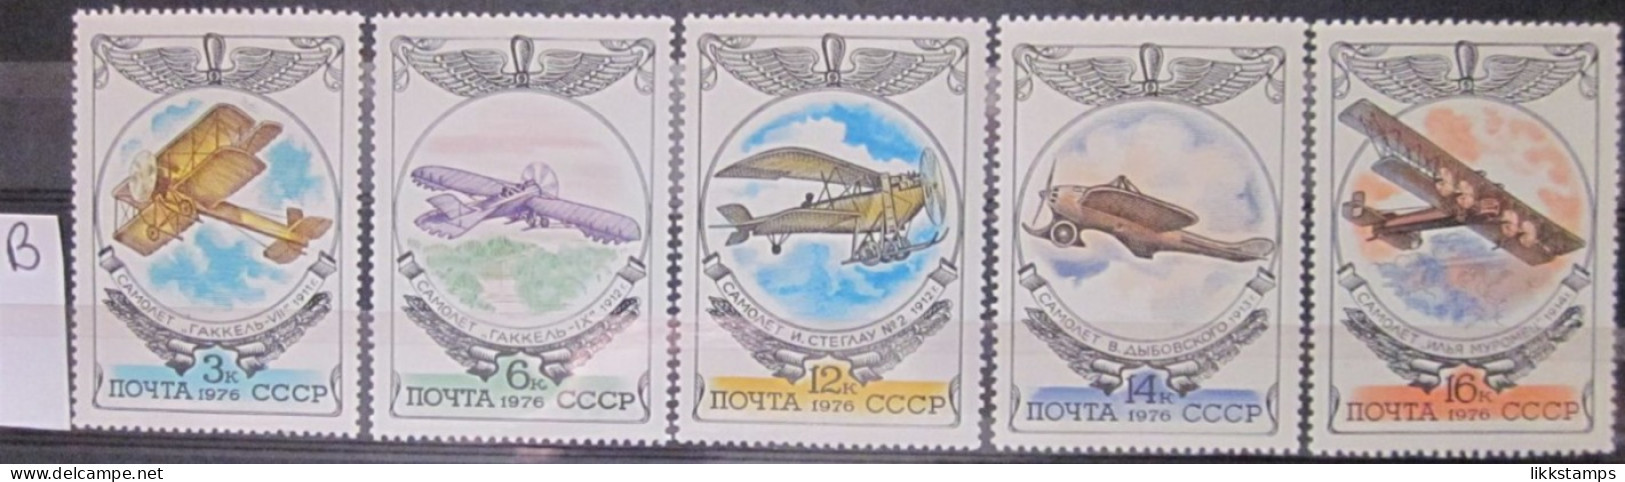 RUSSIA ~ 1976 ~ S.G. NUMBERS 4580 - 4584. ~ 'LOT B' ~ AIRCRAFT. ~ MNH #03584 - Ungebraucht